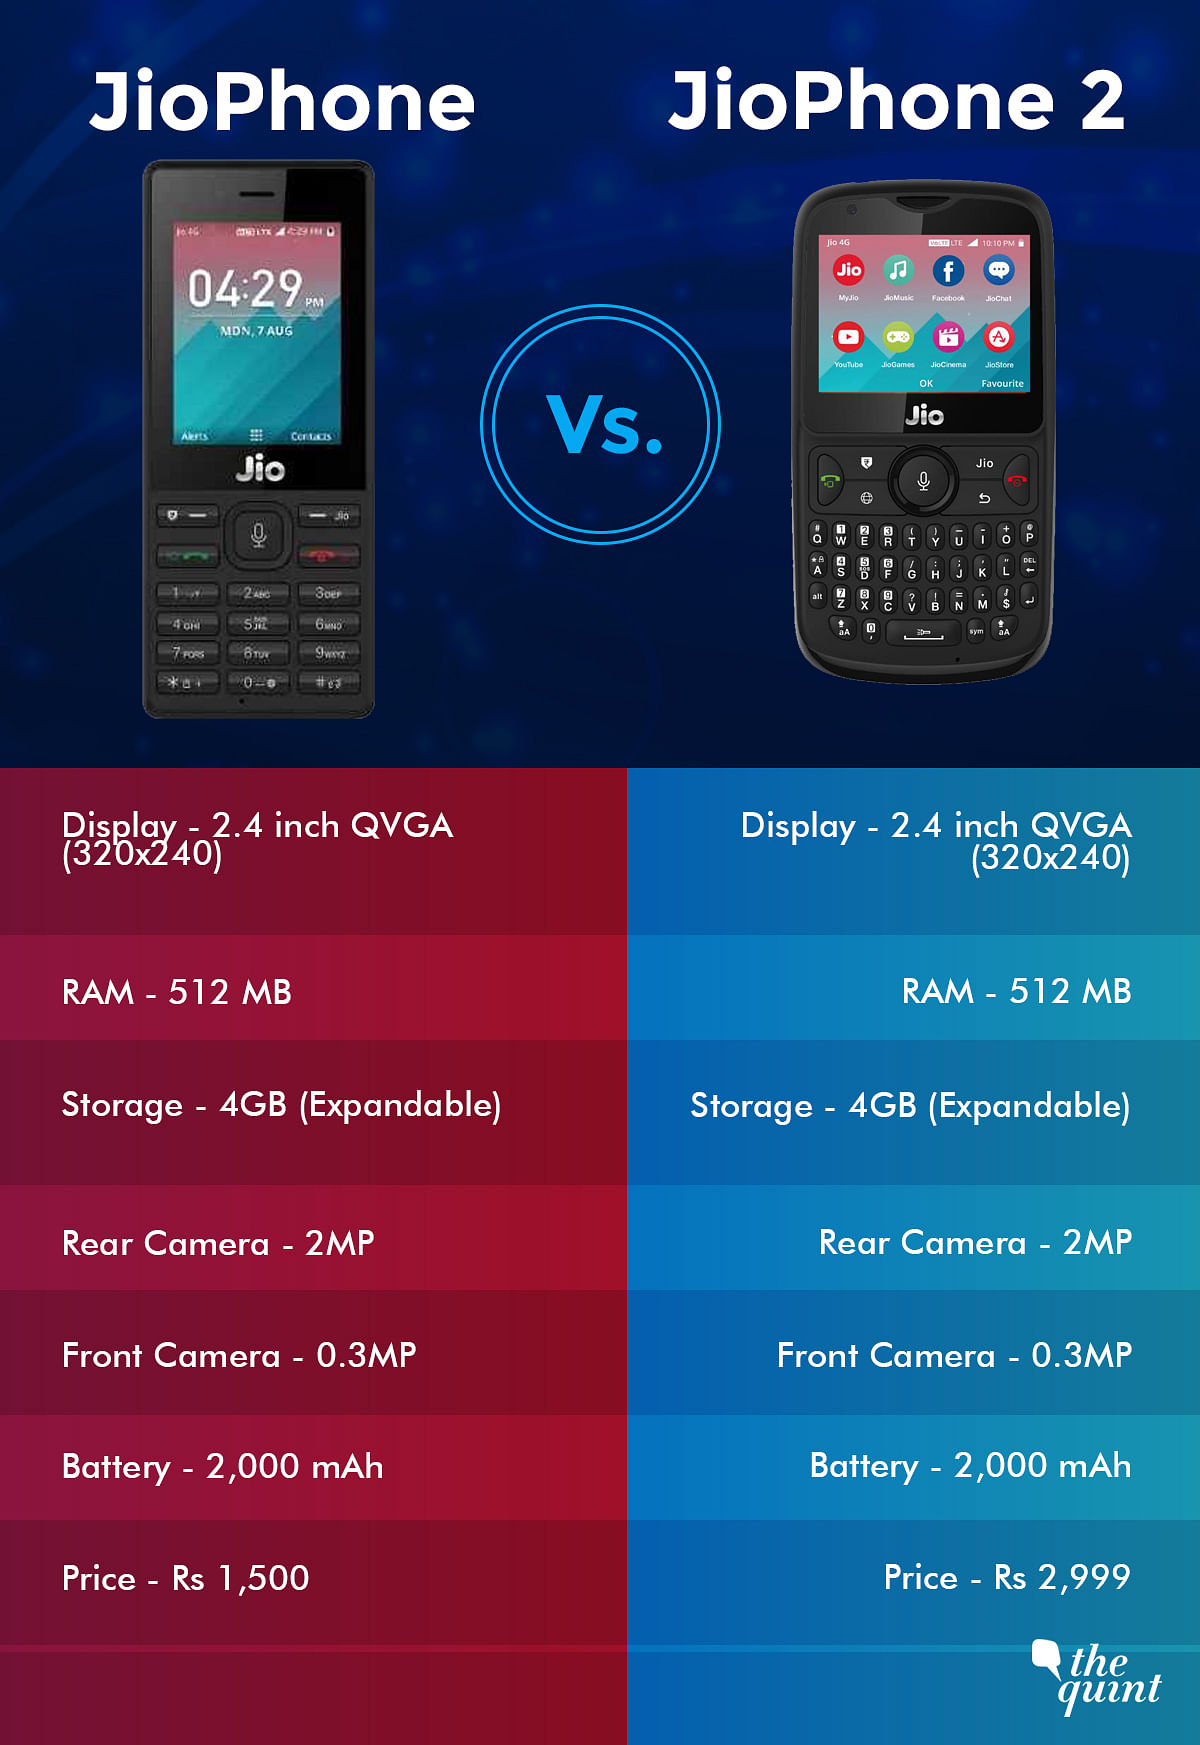 How different is Reliance’s JioPhone 2 compared to the original JioPhone that was launched in 2017? A comparison.